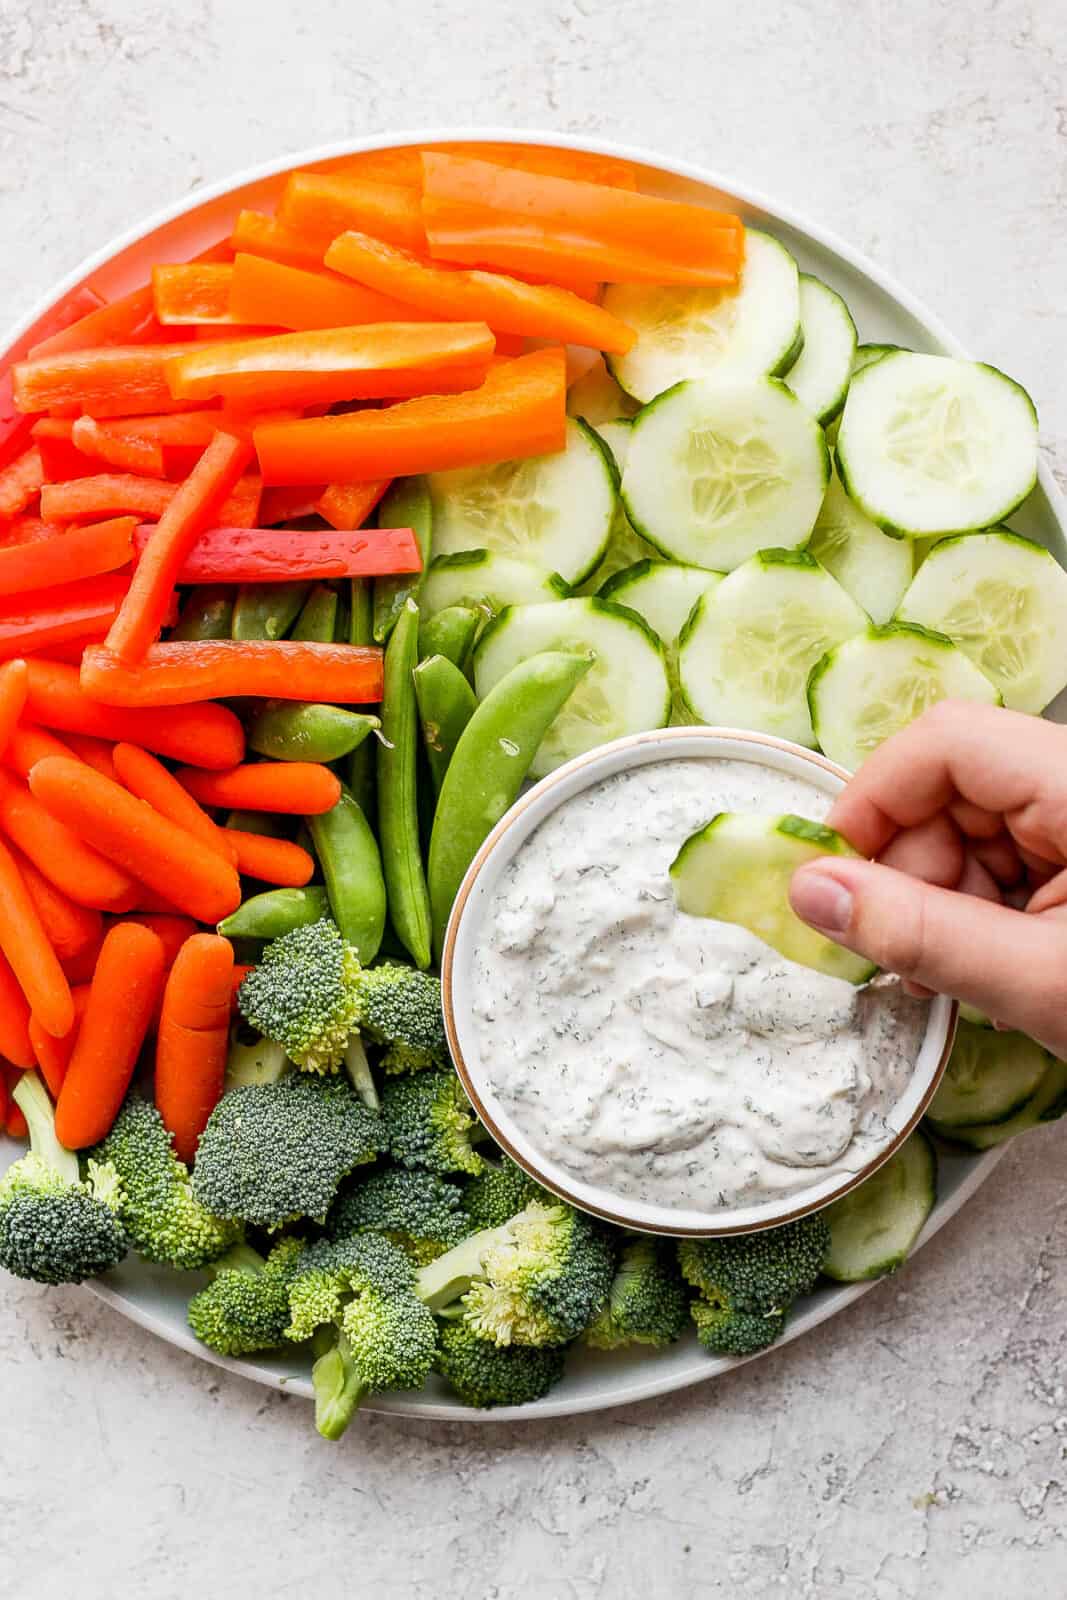 A cucumber being dipped in a small dish of healthy veggie dip on a plate of veggies.